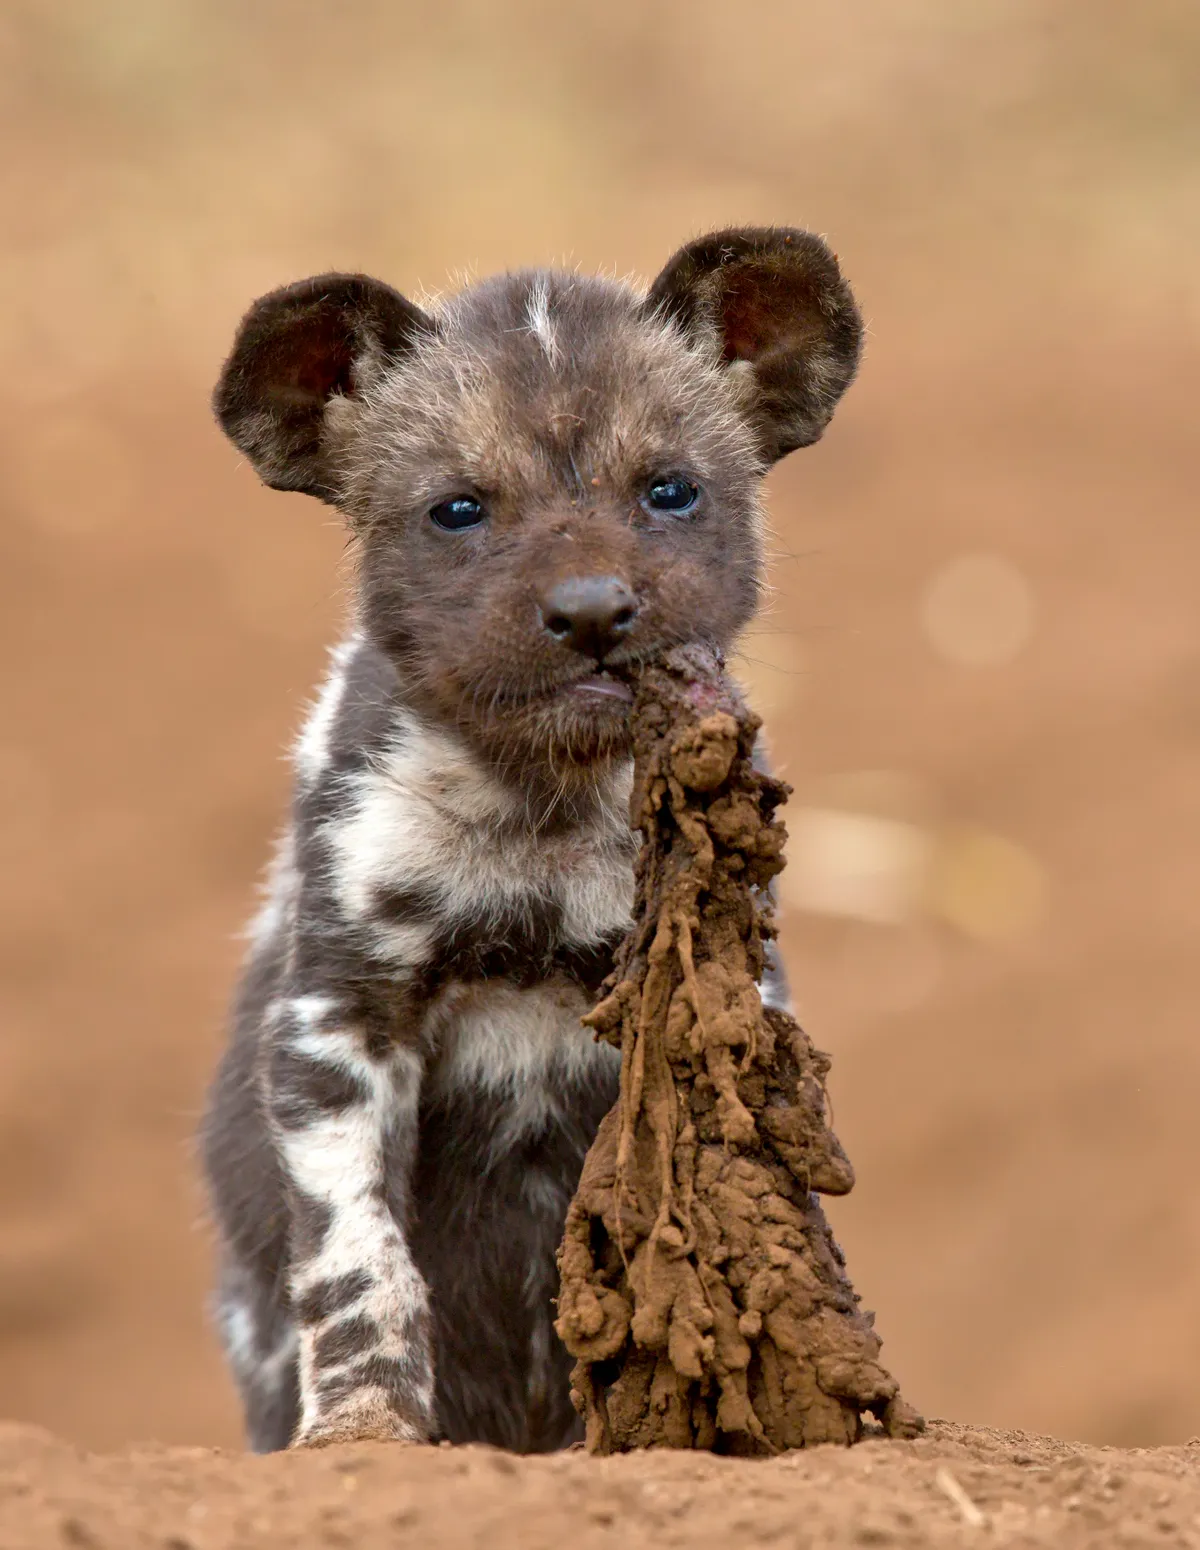 A cute, tiny African wild dog pup sits on the brown ground, with the muddy remains of the day’s kill in its mouth.